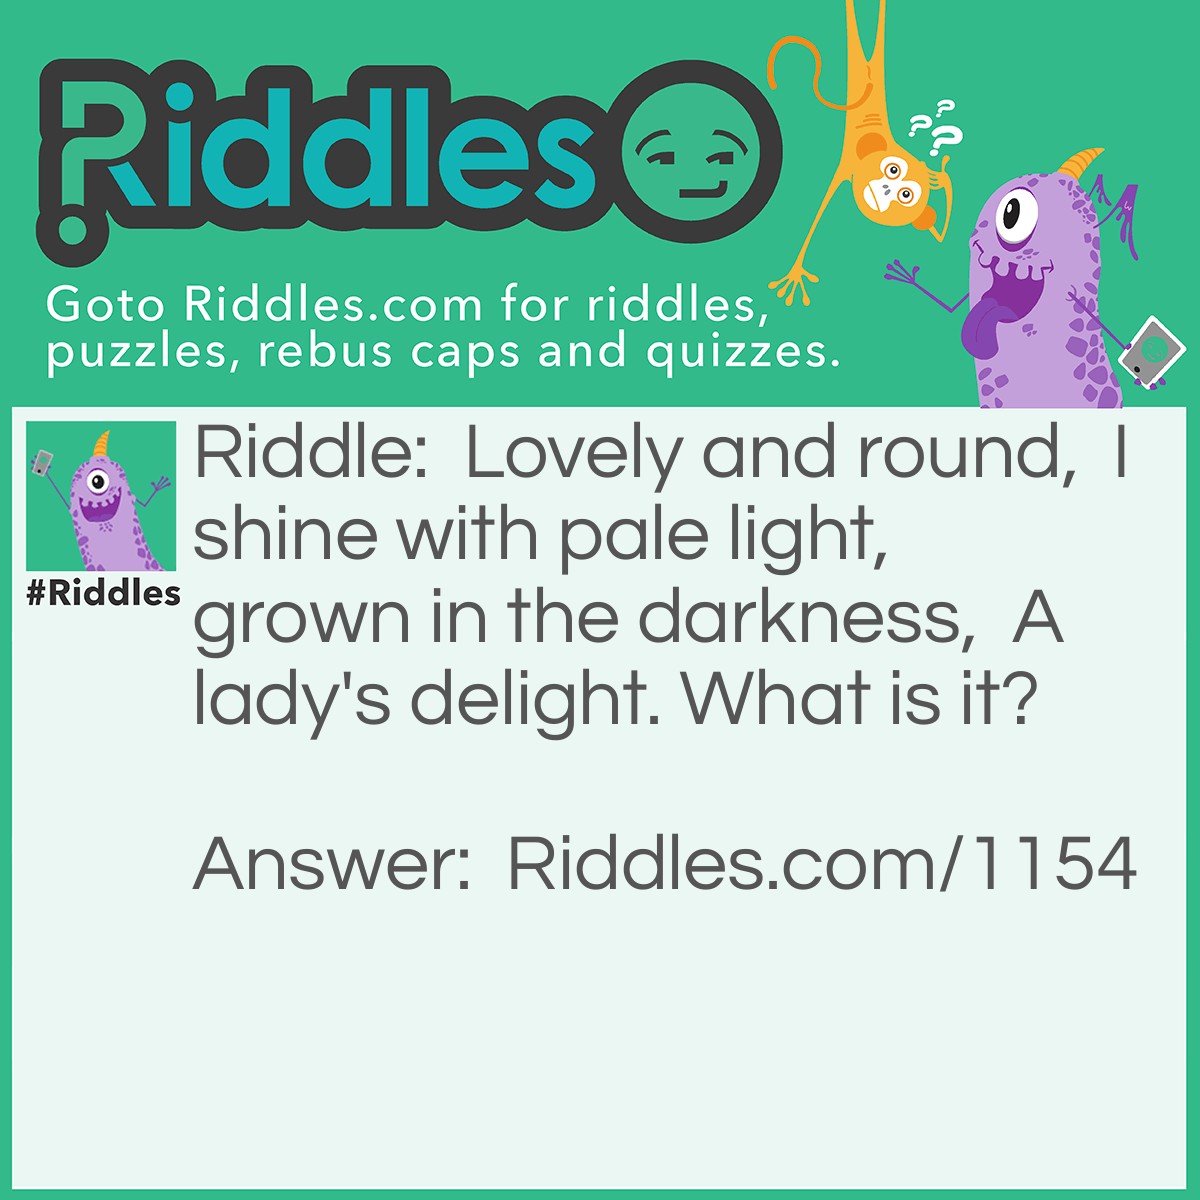 Riddle: Lovely and round,  I shine with pale light,  grown in the darkness,  A lady's delight. What is it? Answer: A pearl.